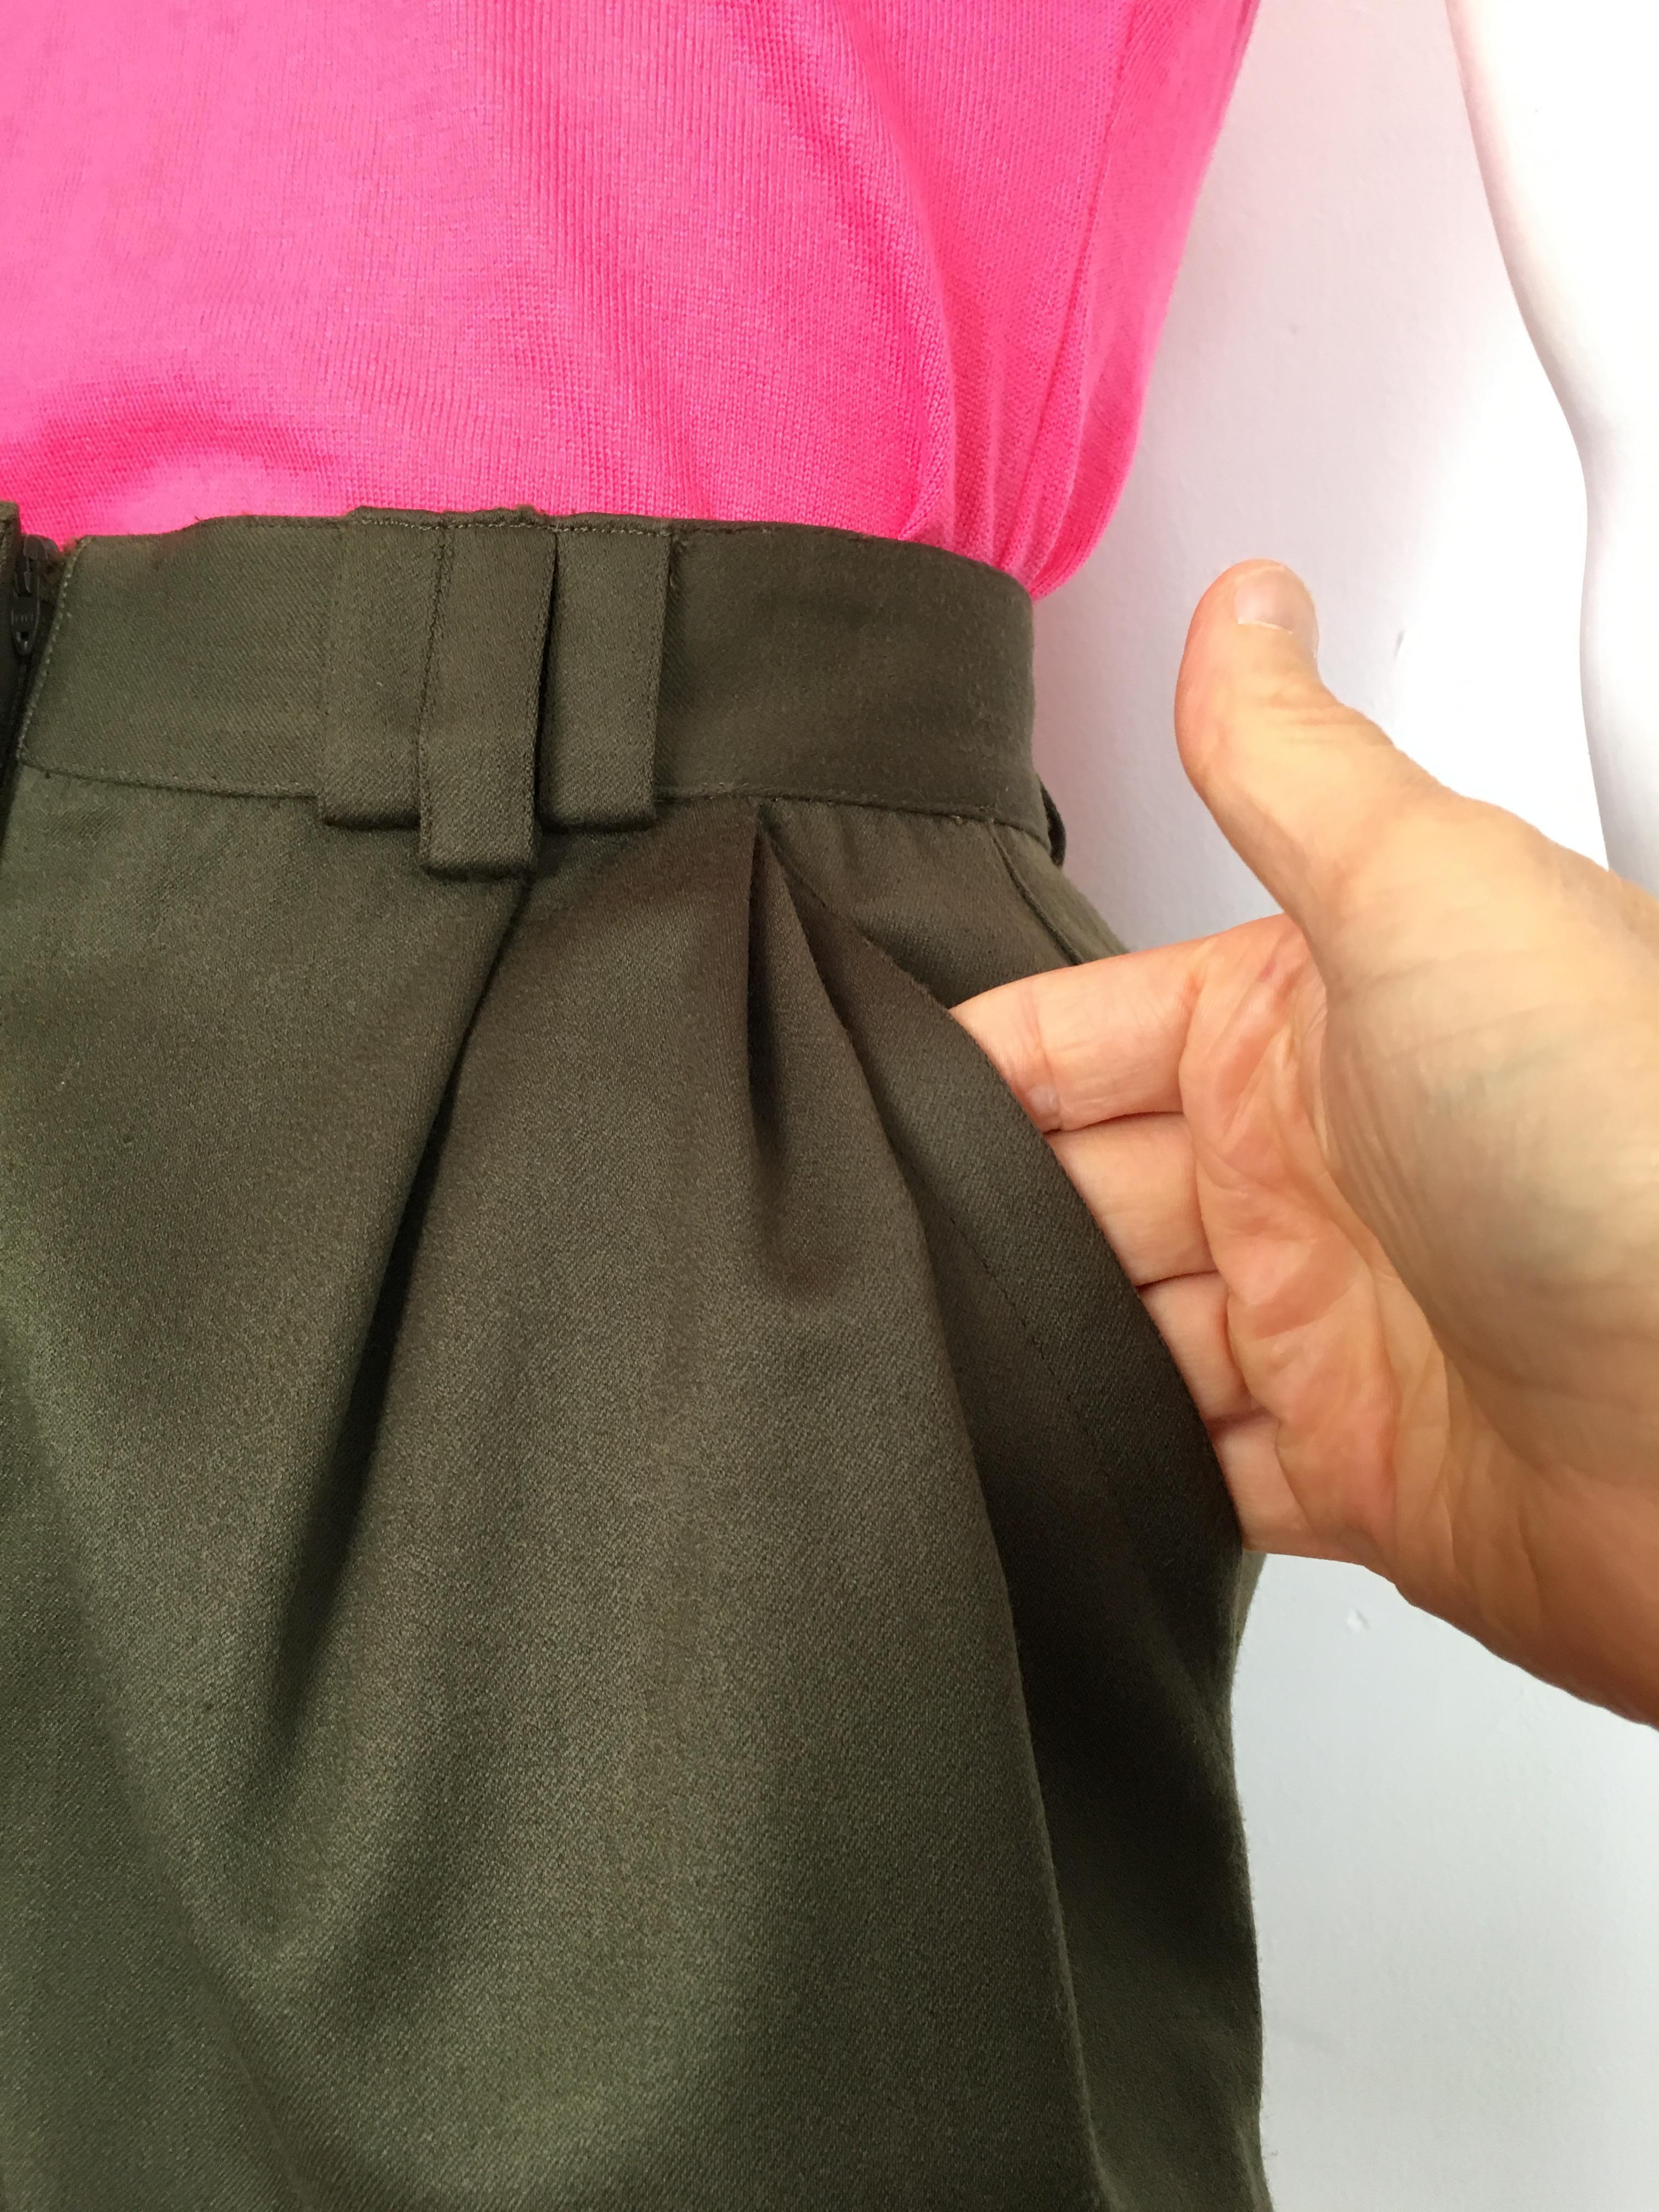 Gianni Versace 1980s Olive Wool Skirt with Pockets Size 6. For Sale 4